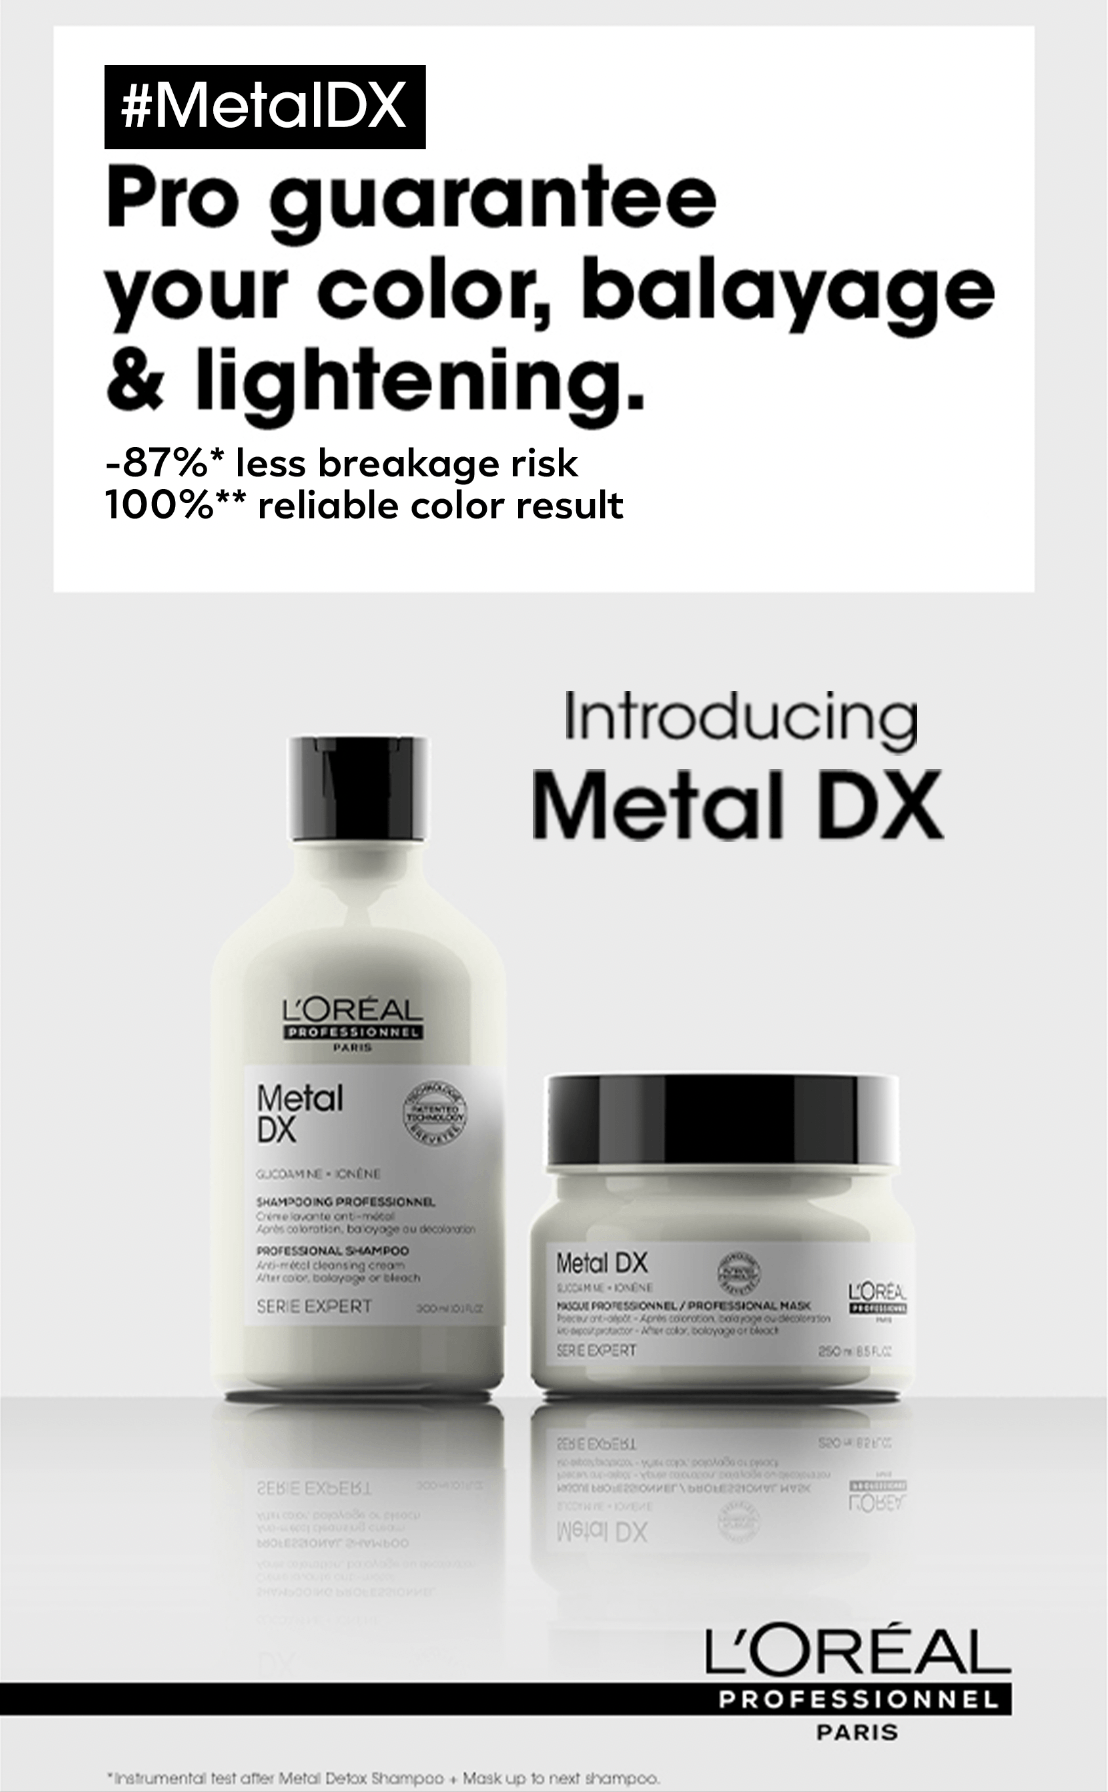 L'OREAL METAL DX: PROFESSIONAL GUARANTEE YOUR HAIR COLOURING